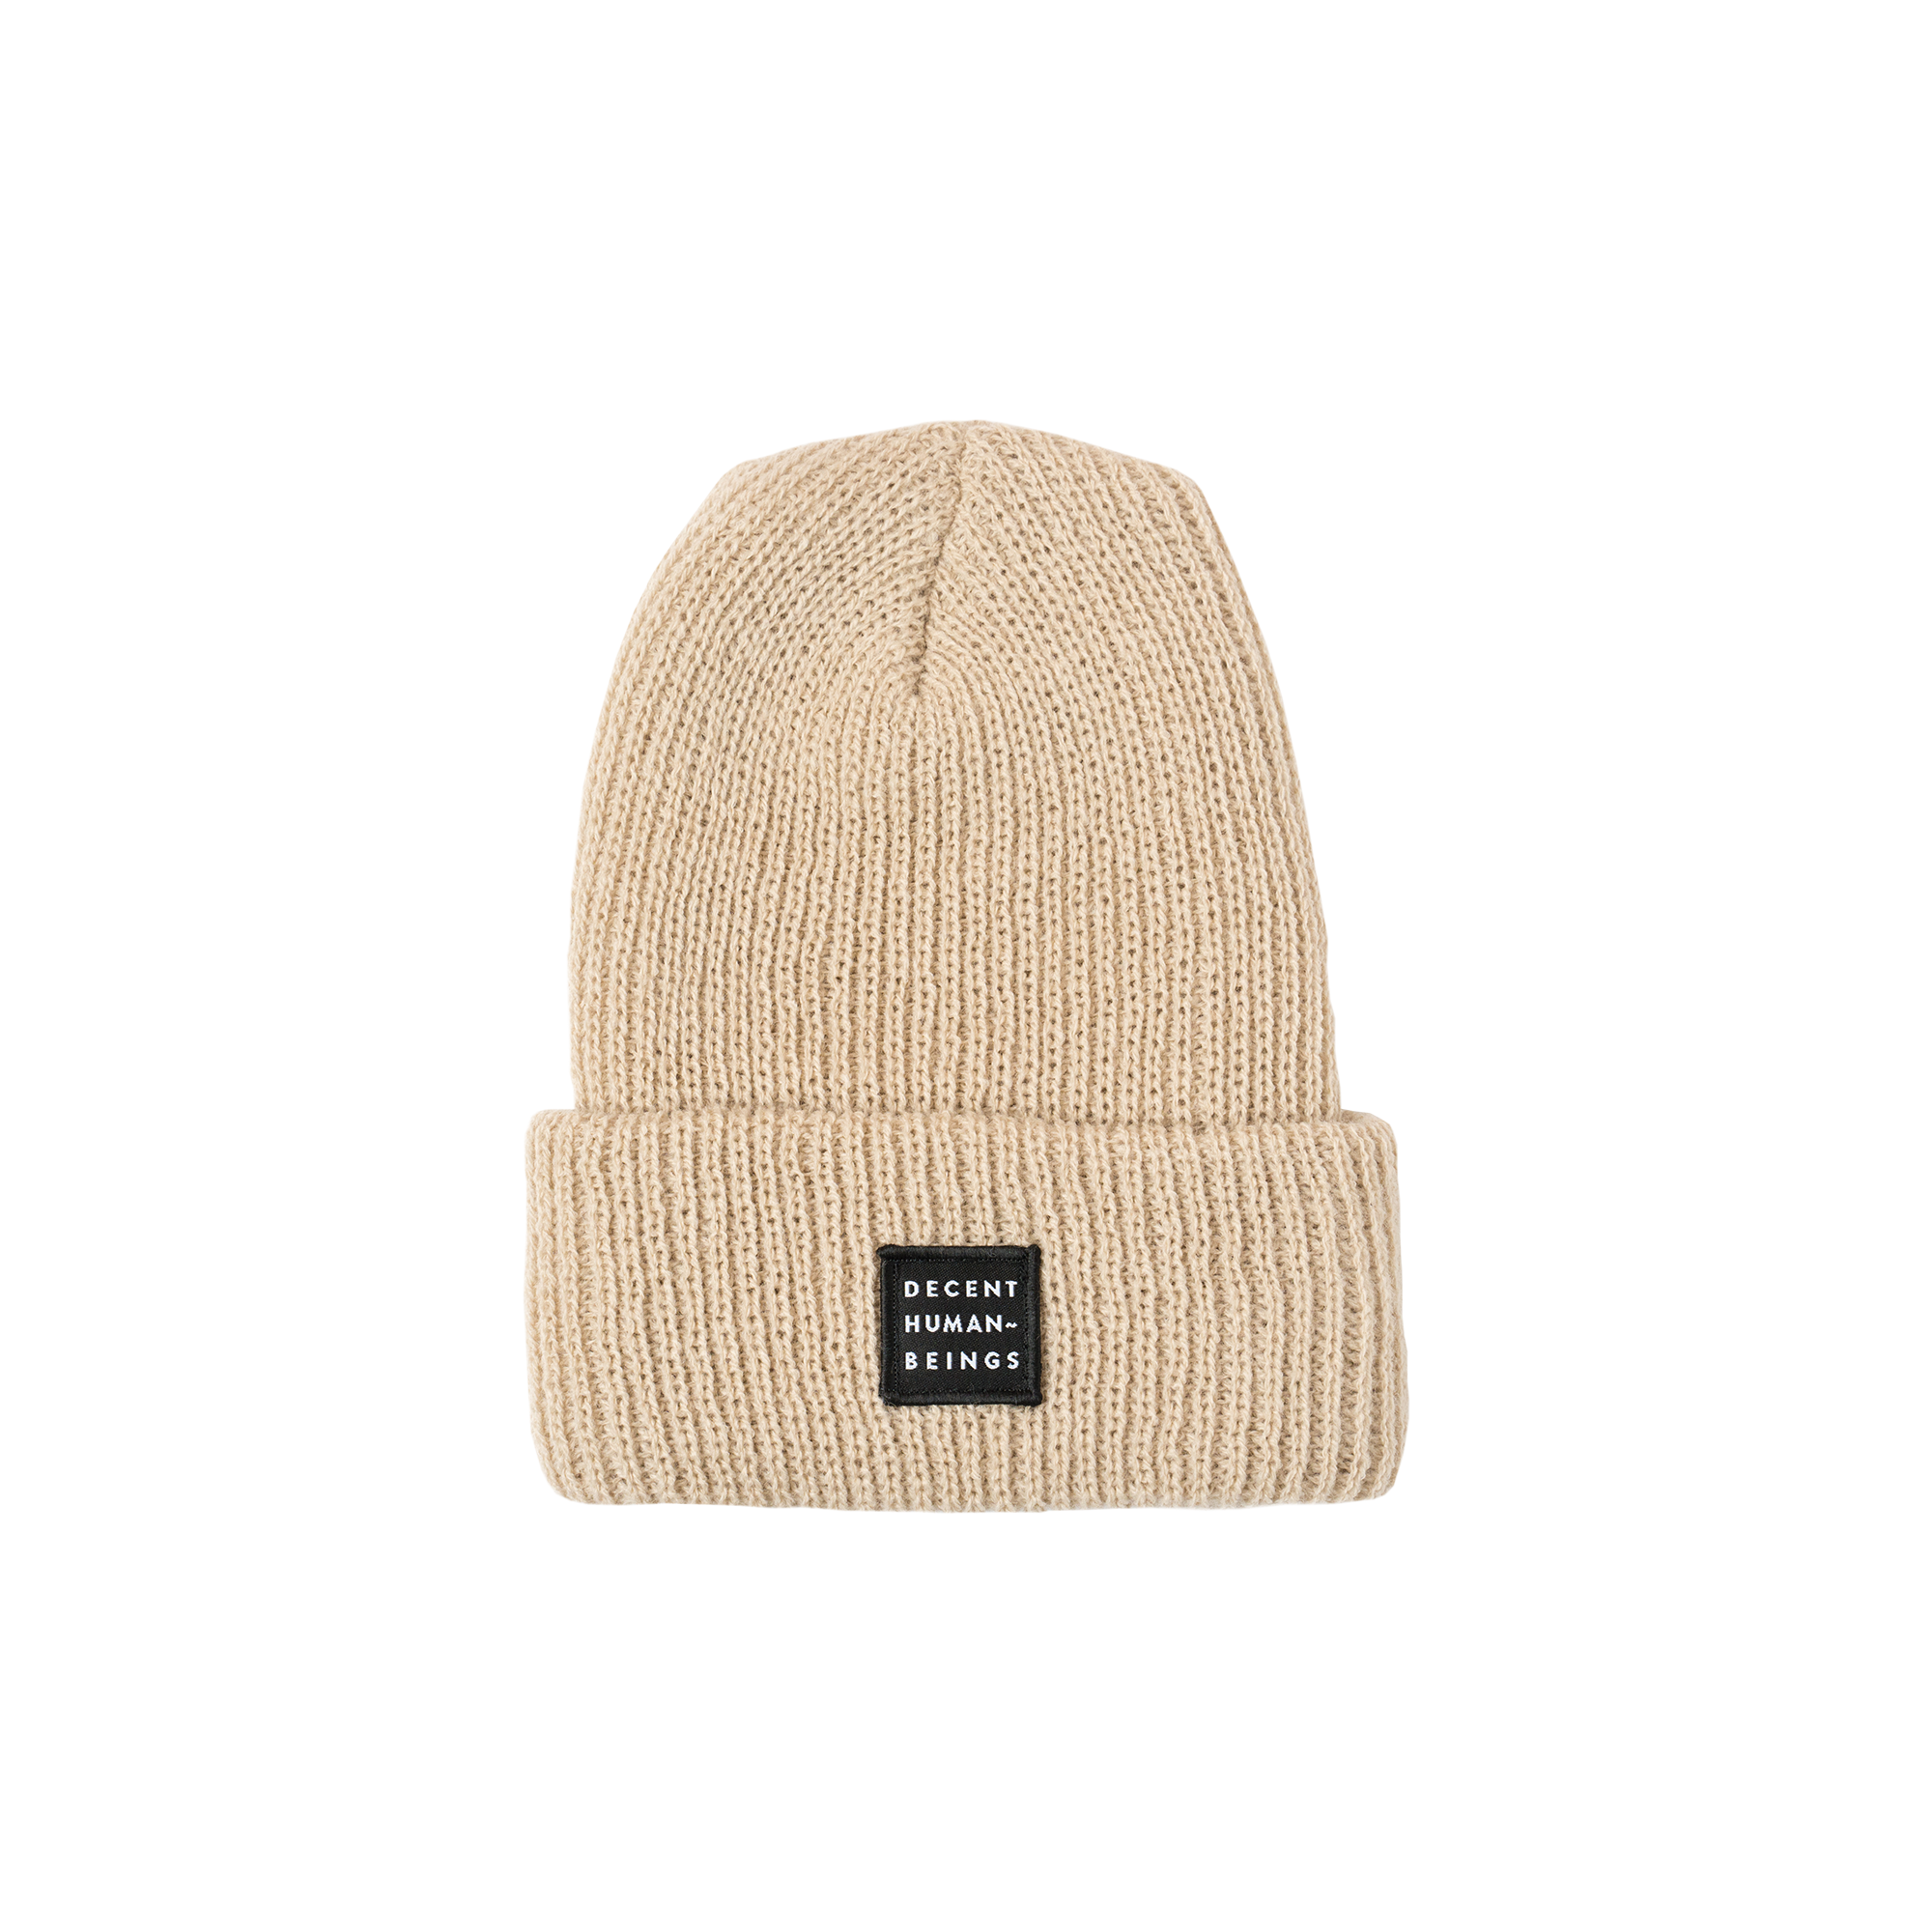 RIBBED KNIT LOGO PATCH BEANIE - OAT